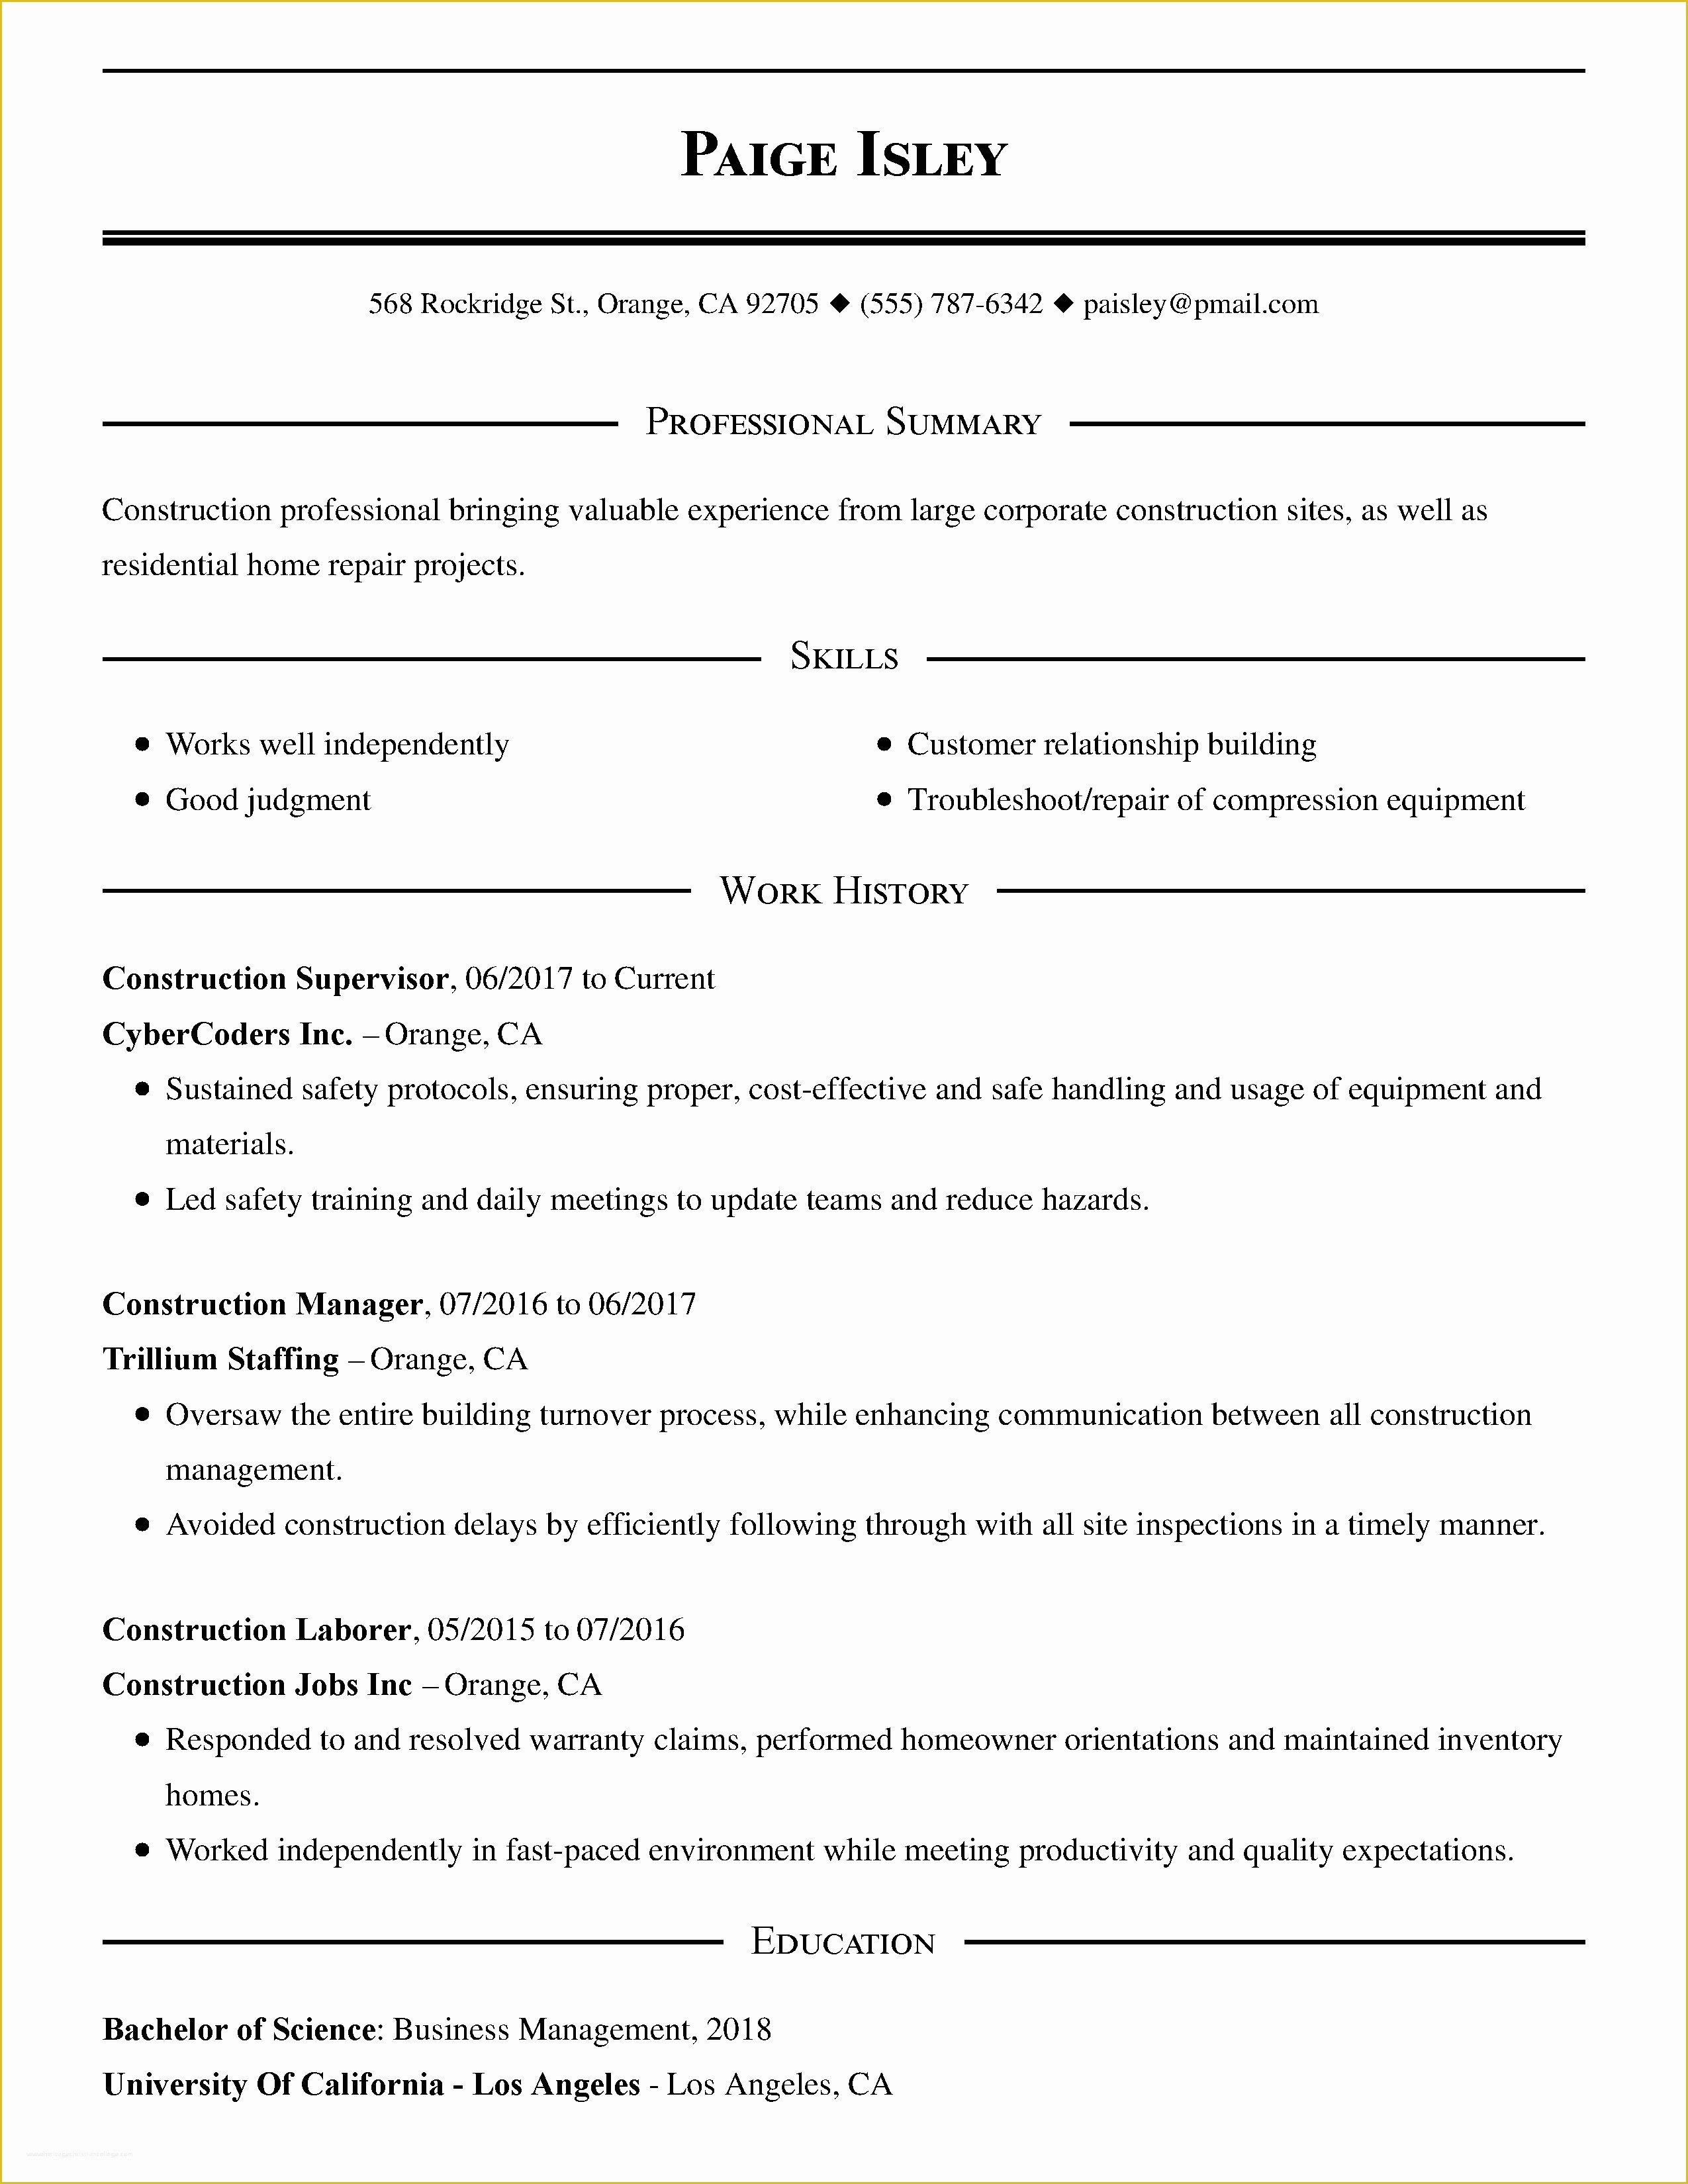 Free Resume Templates Com Of Free Resume Templates Easy to Customize Line Templates